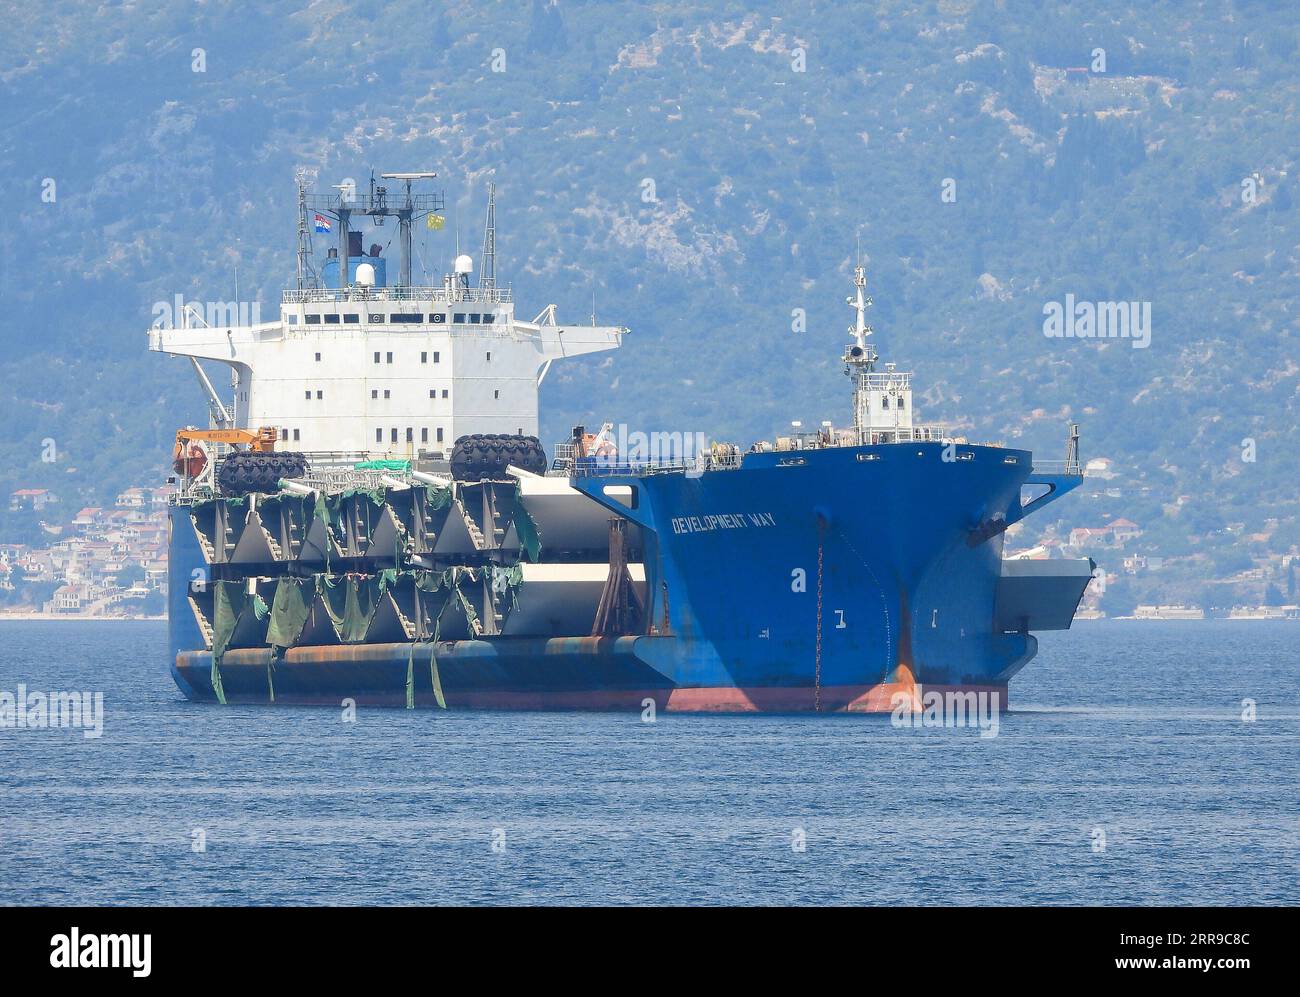 News Bilder des Tages 210609 -- PLOCE, June 9, 2021 -- A cargo ship carrying the final batch of steel box girders for the construction of the Peljesac Bridge arrive at the Port of Ploce, Croatia, June 8, 2021. The construction of the Peljesac Bridge, the biggest infrastructure project in Croatia, will be completed in June 2022. Photo by /Pixsell via Xinhua CROATIA-PLOCE-CARGO SHIP-PELJESAC BRIDGE IvoxCagalj PUBLICATIONxNOTxINxCHN Stock Photo